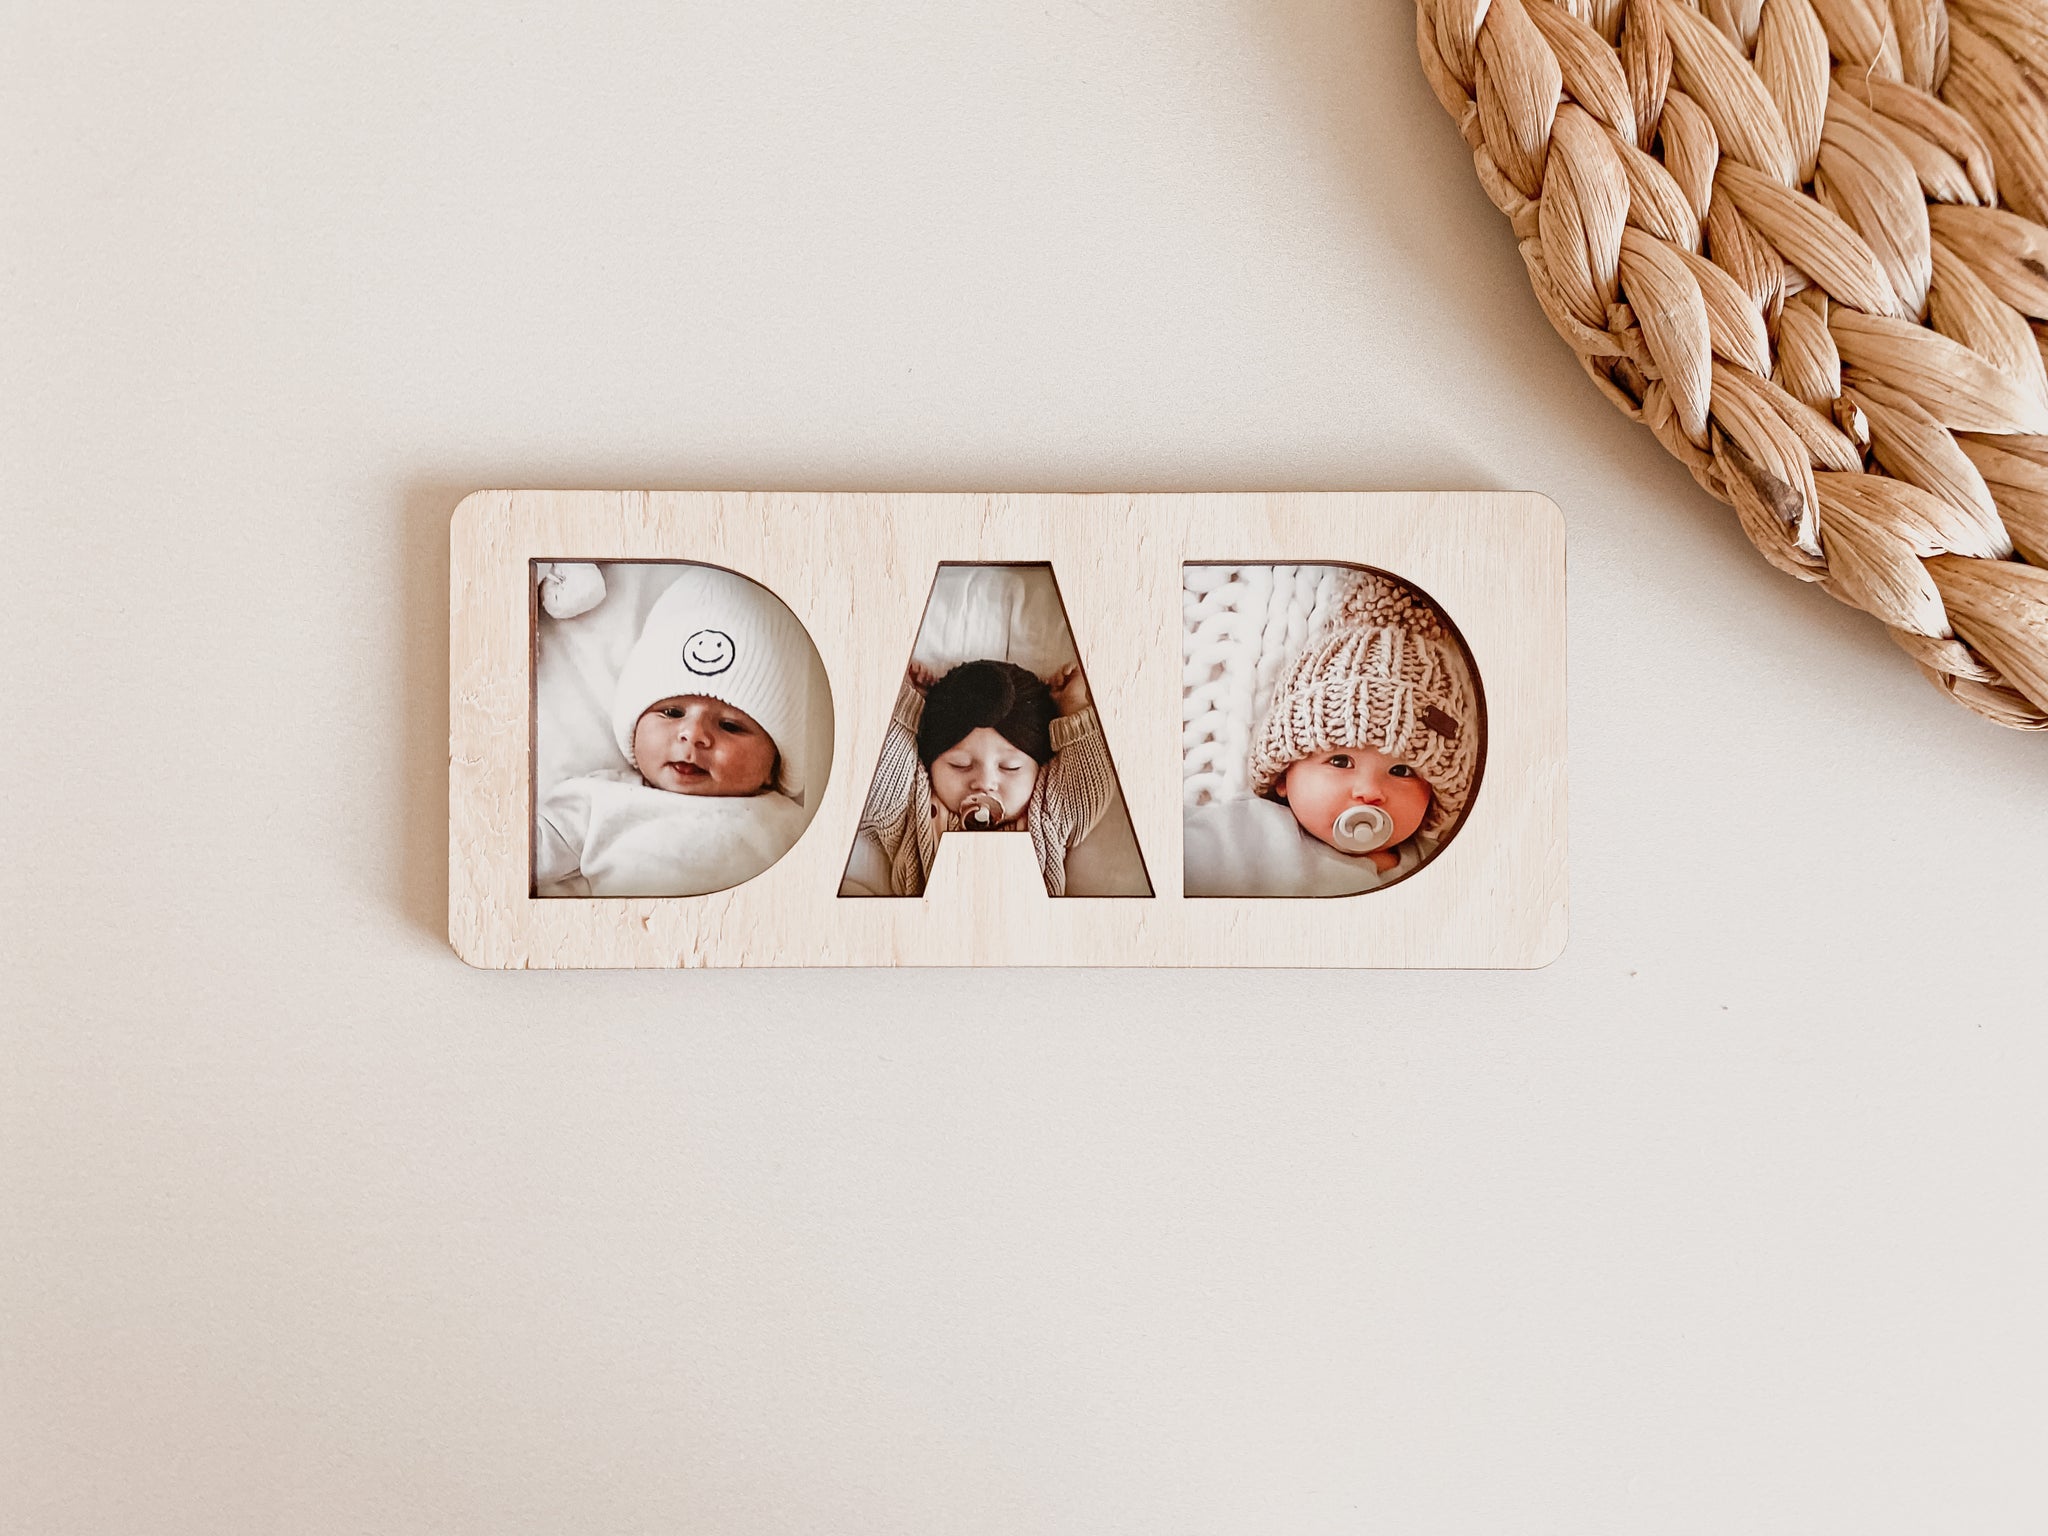 Father's Day DIY Photo Block